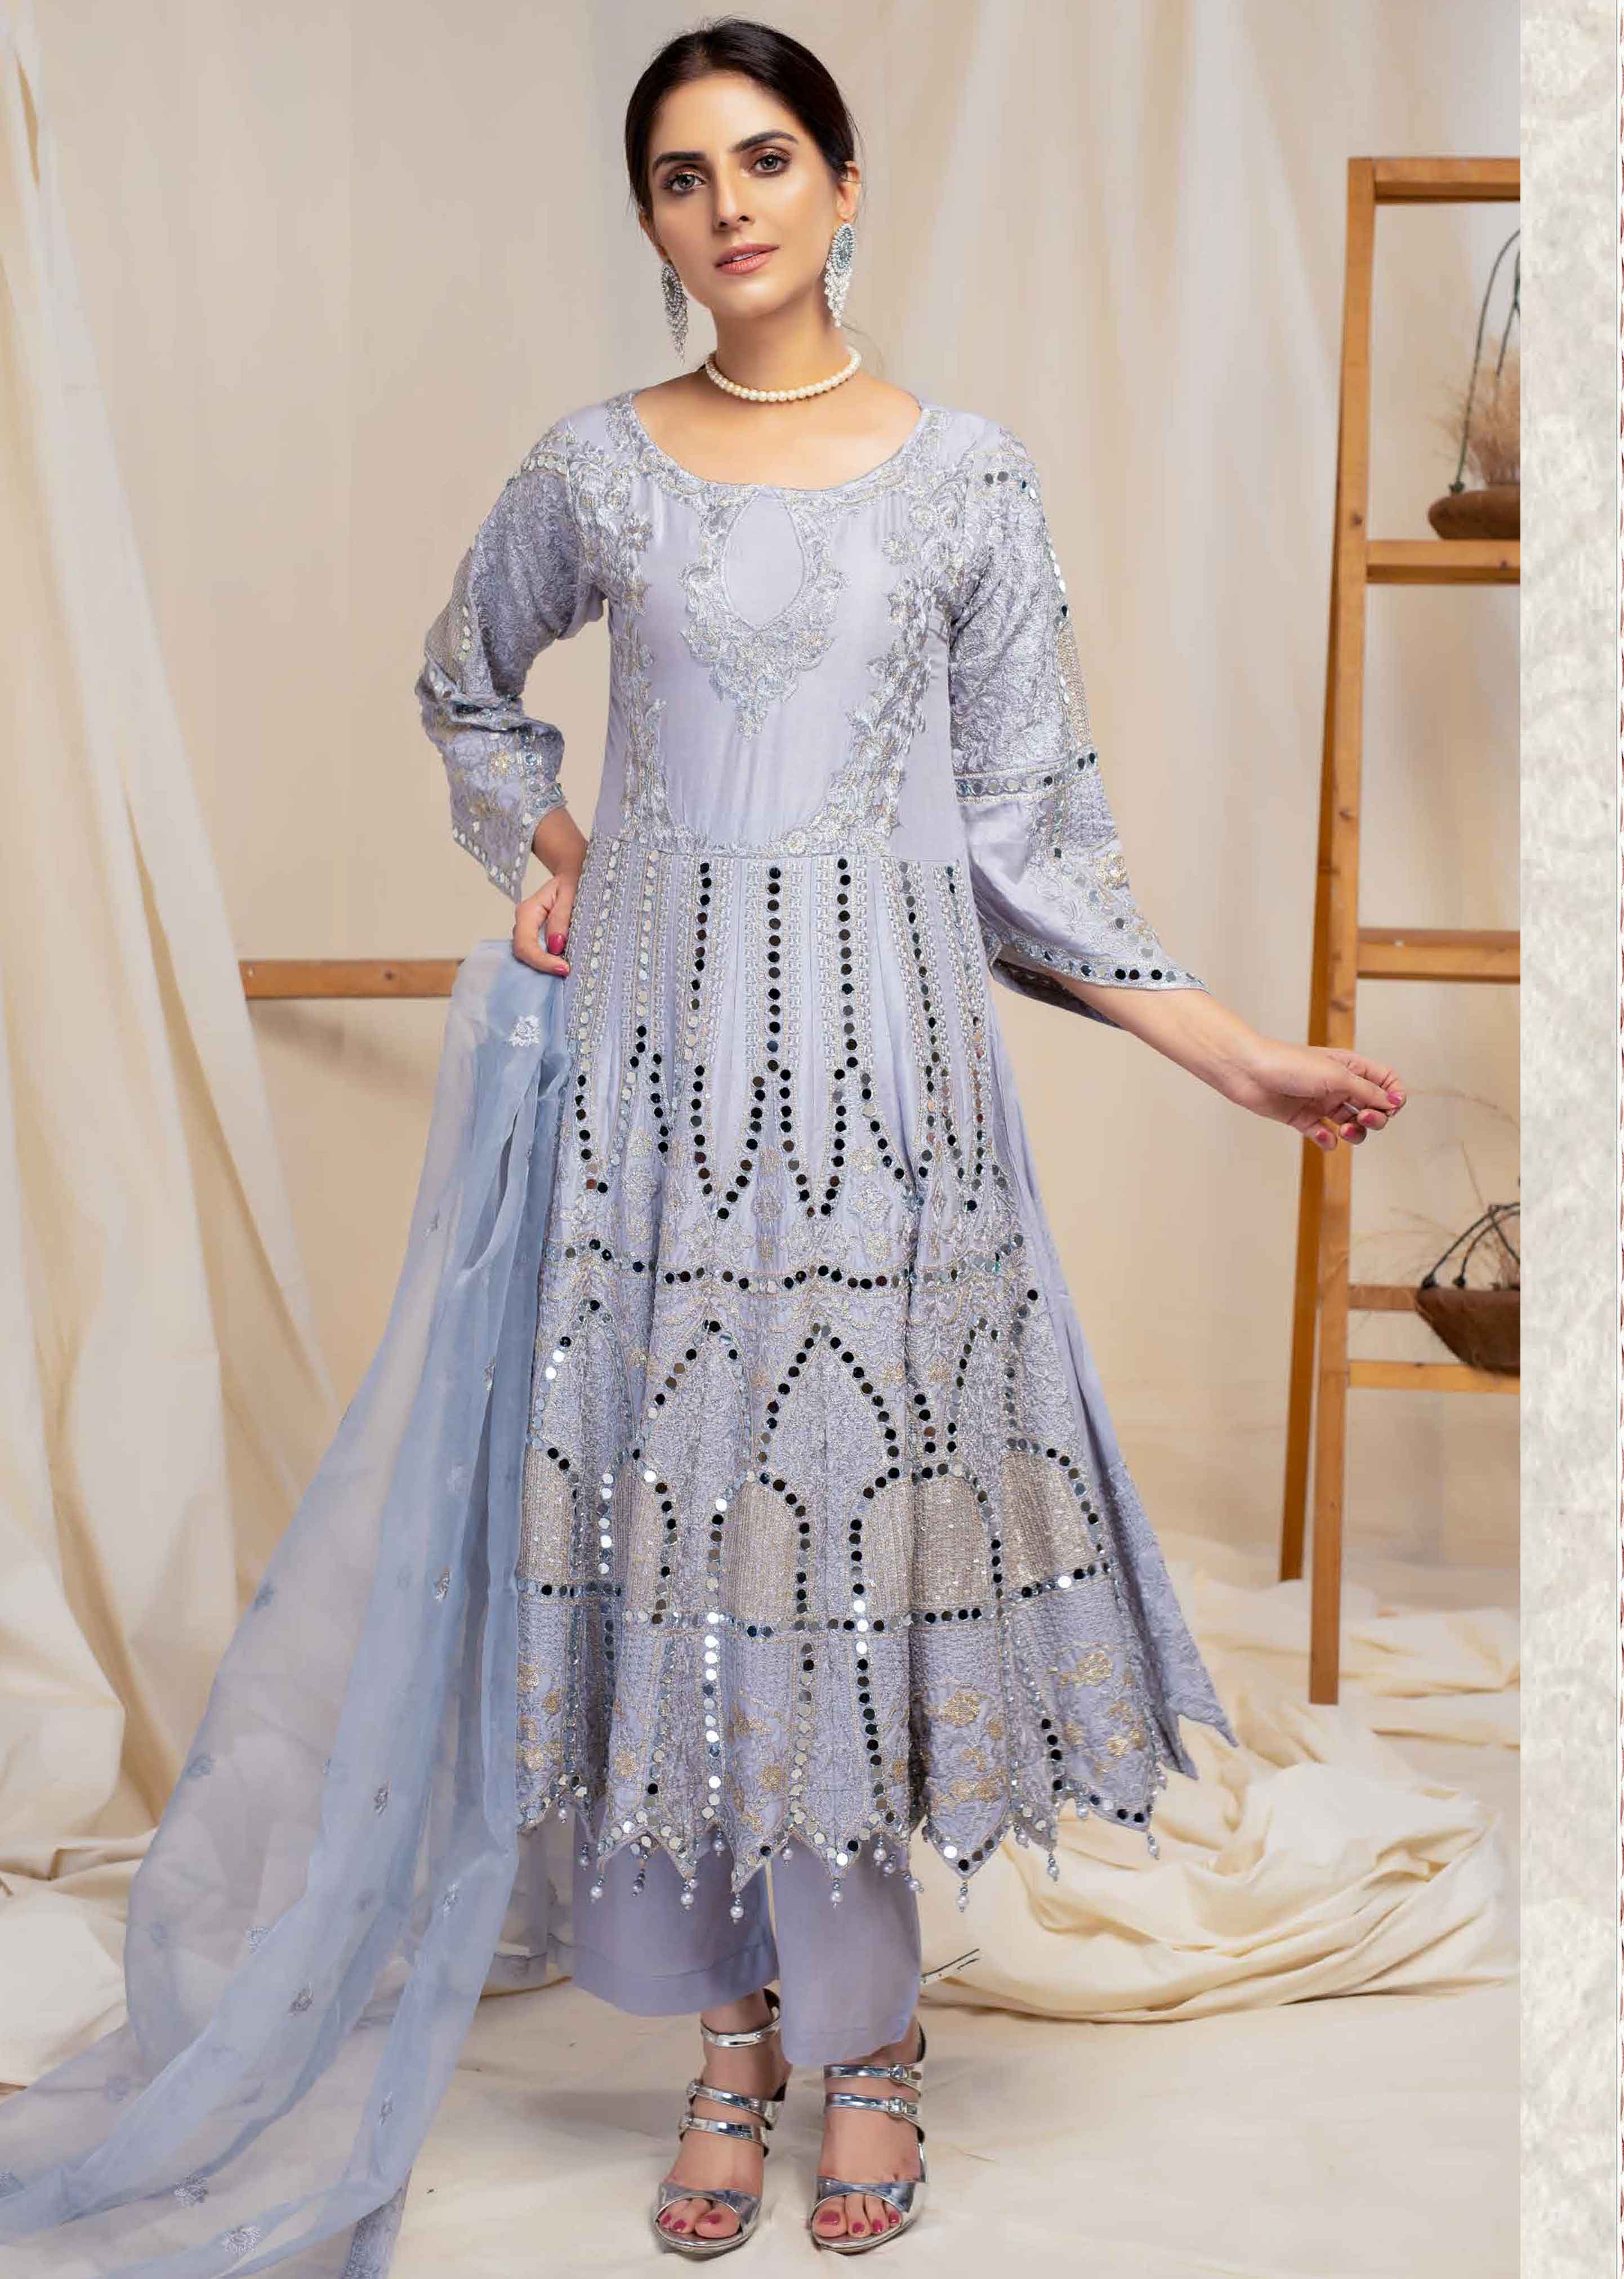 Simrans Mirror Frock Grey Outfit with Embroidered Net Dupatta